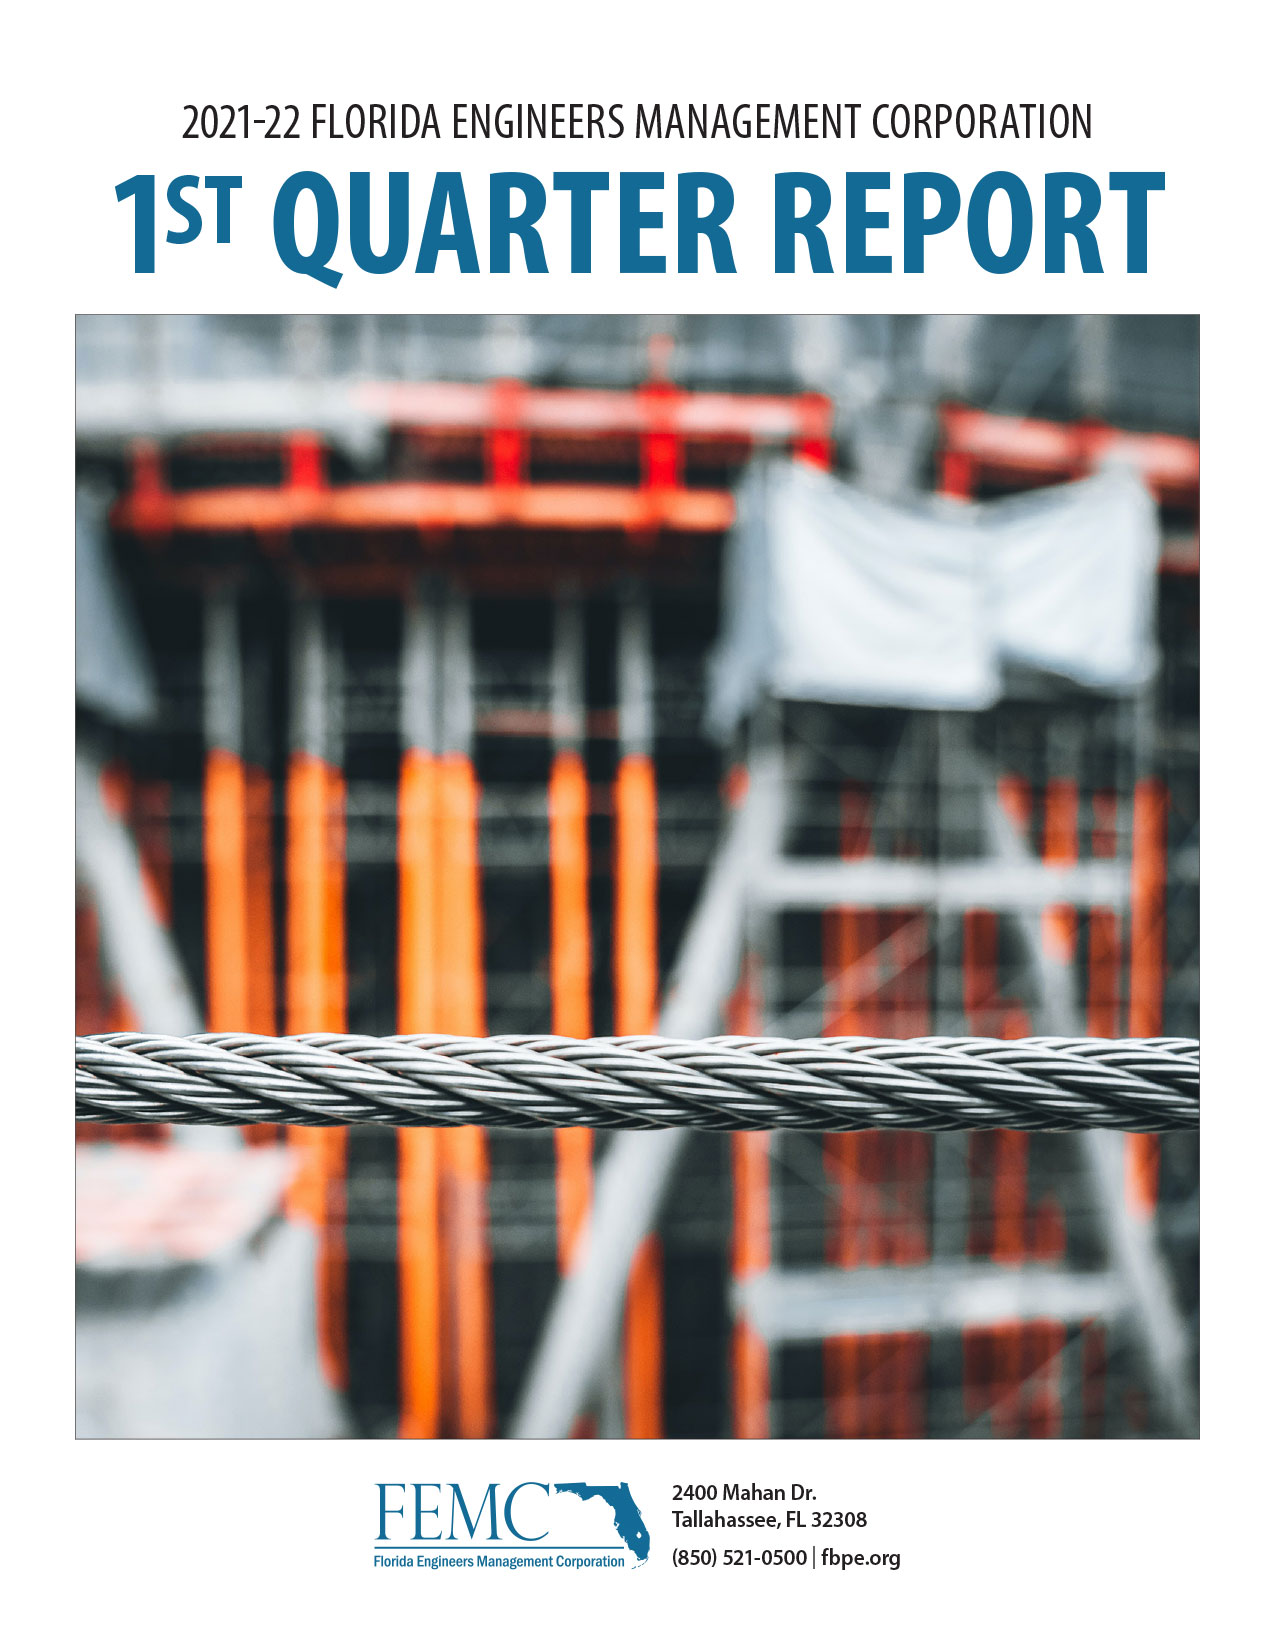 The cover of the 2021-22 Florida Engineers Management Corporation 1st Quarter Report